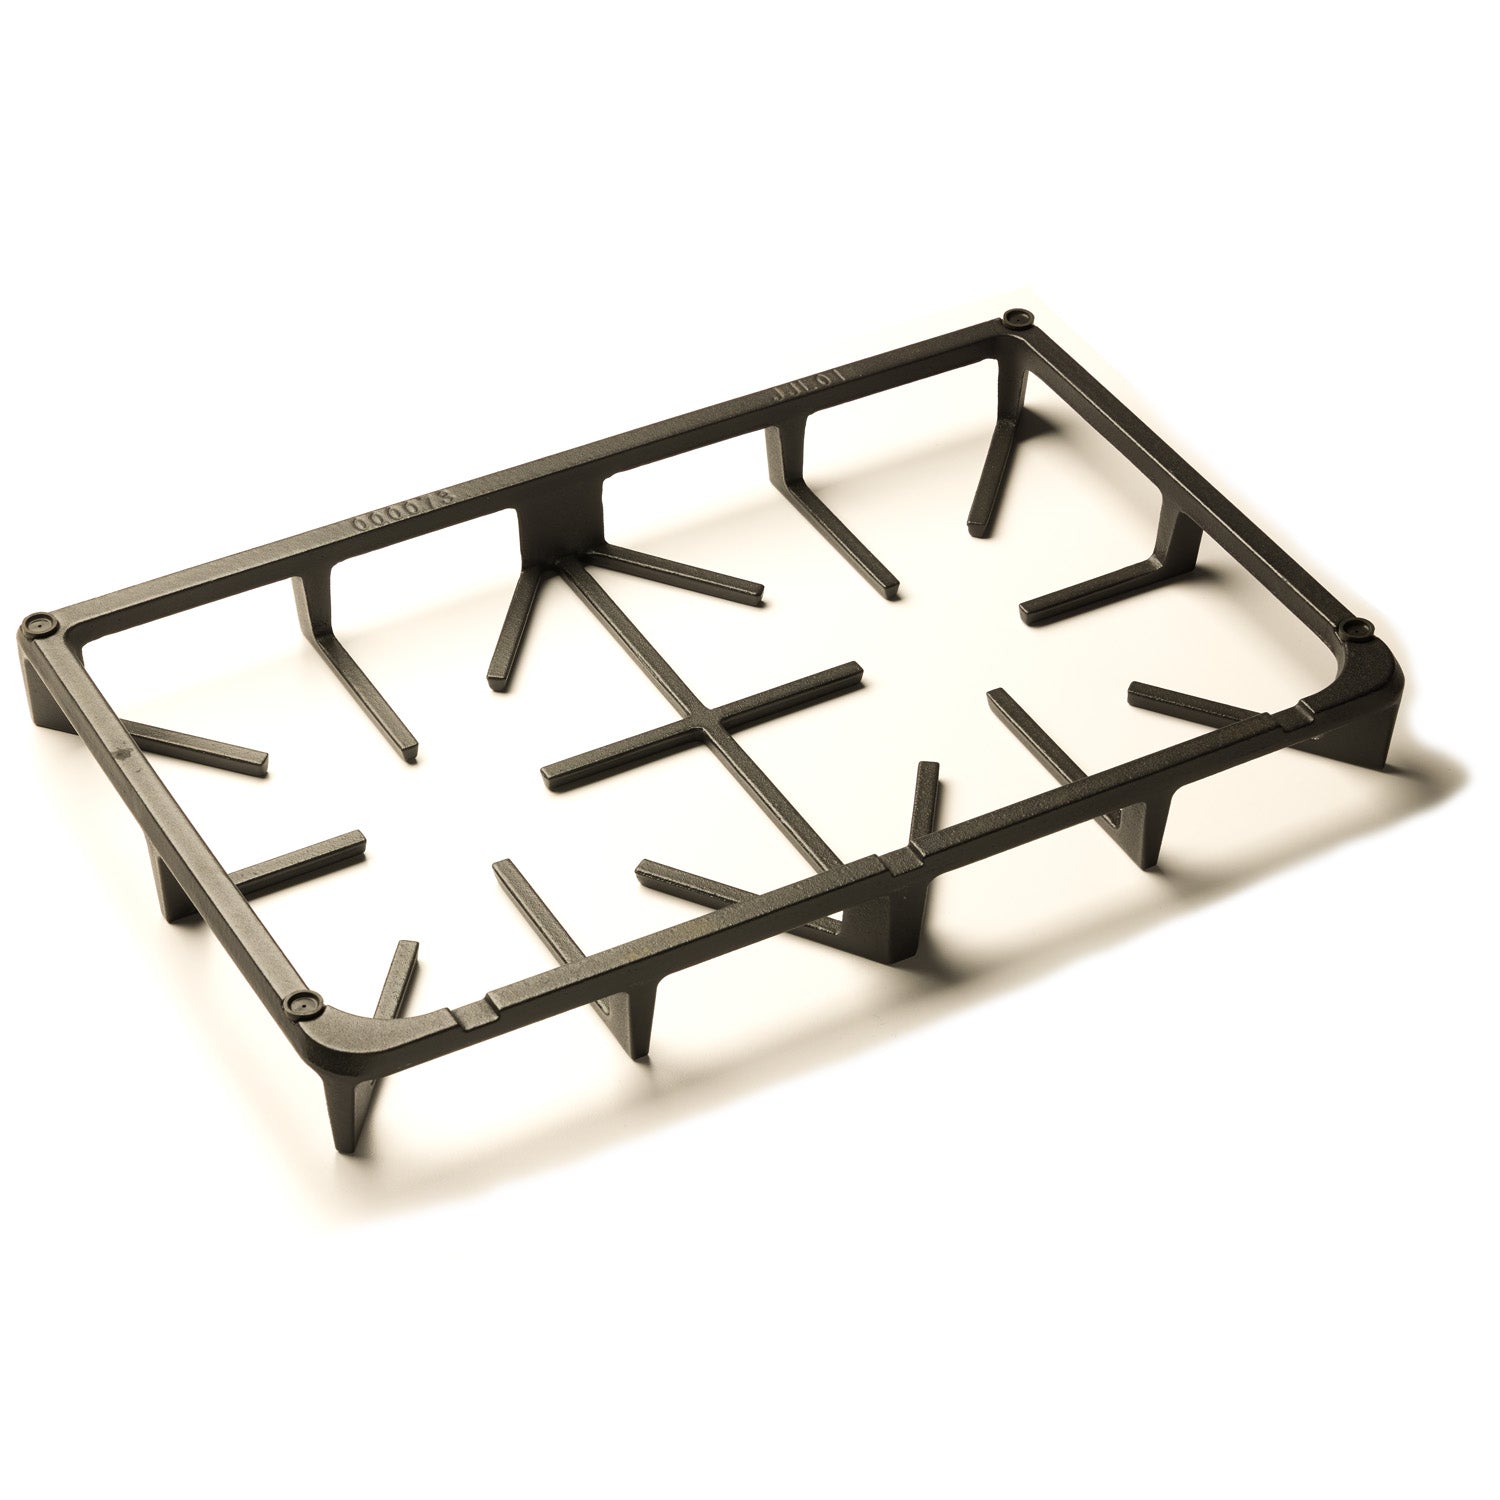 TGC3001 Left & Right Cooking Grate Part Number 10130073